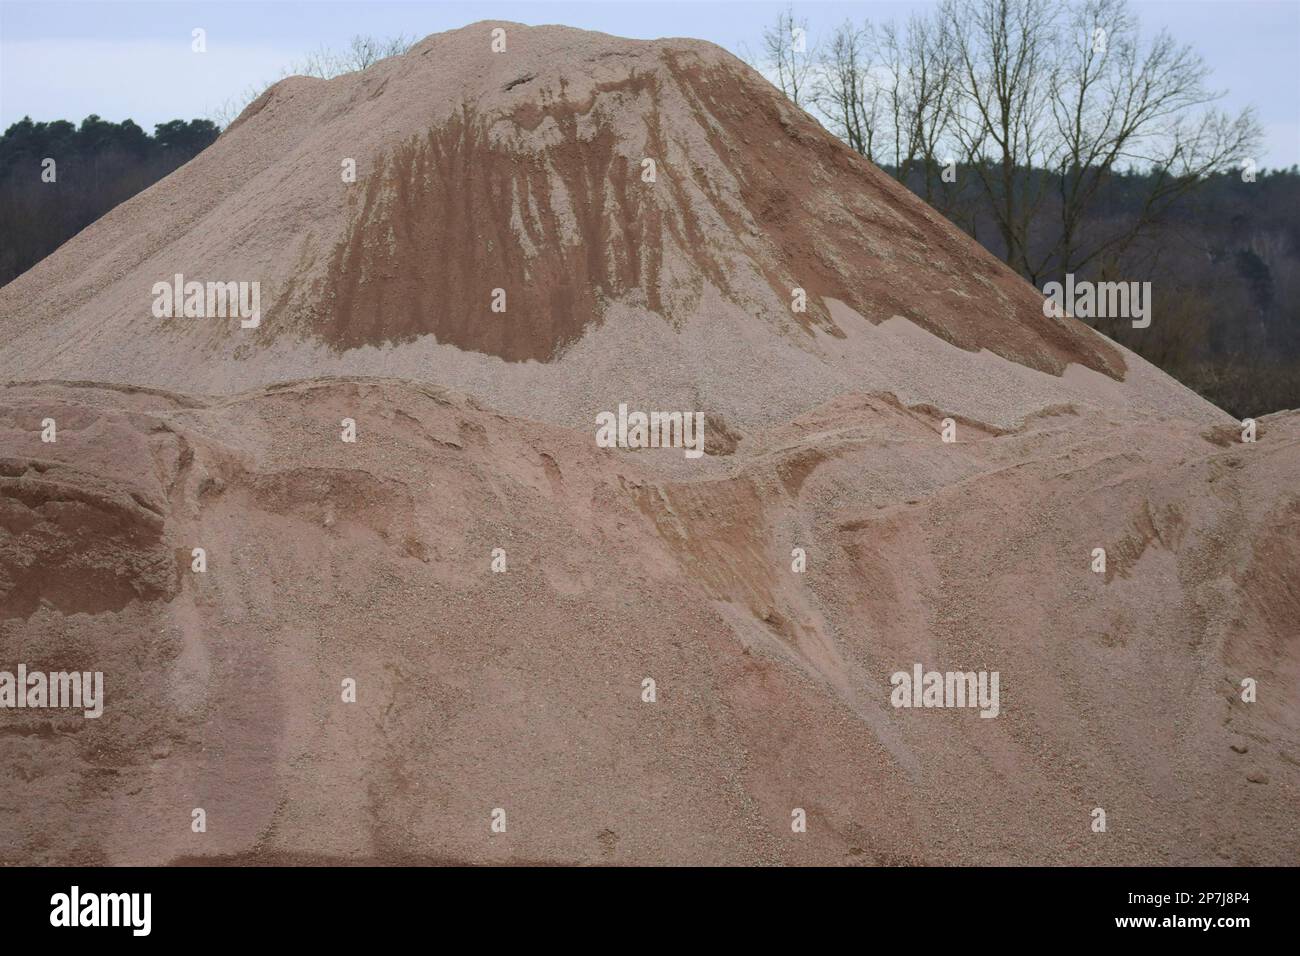 the interesting Weather side of a Pile of Sand Stock Photo